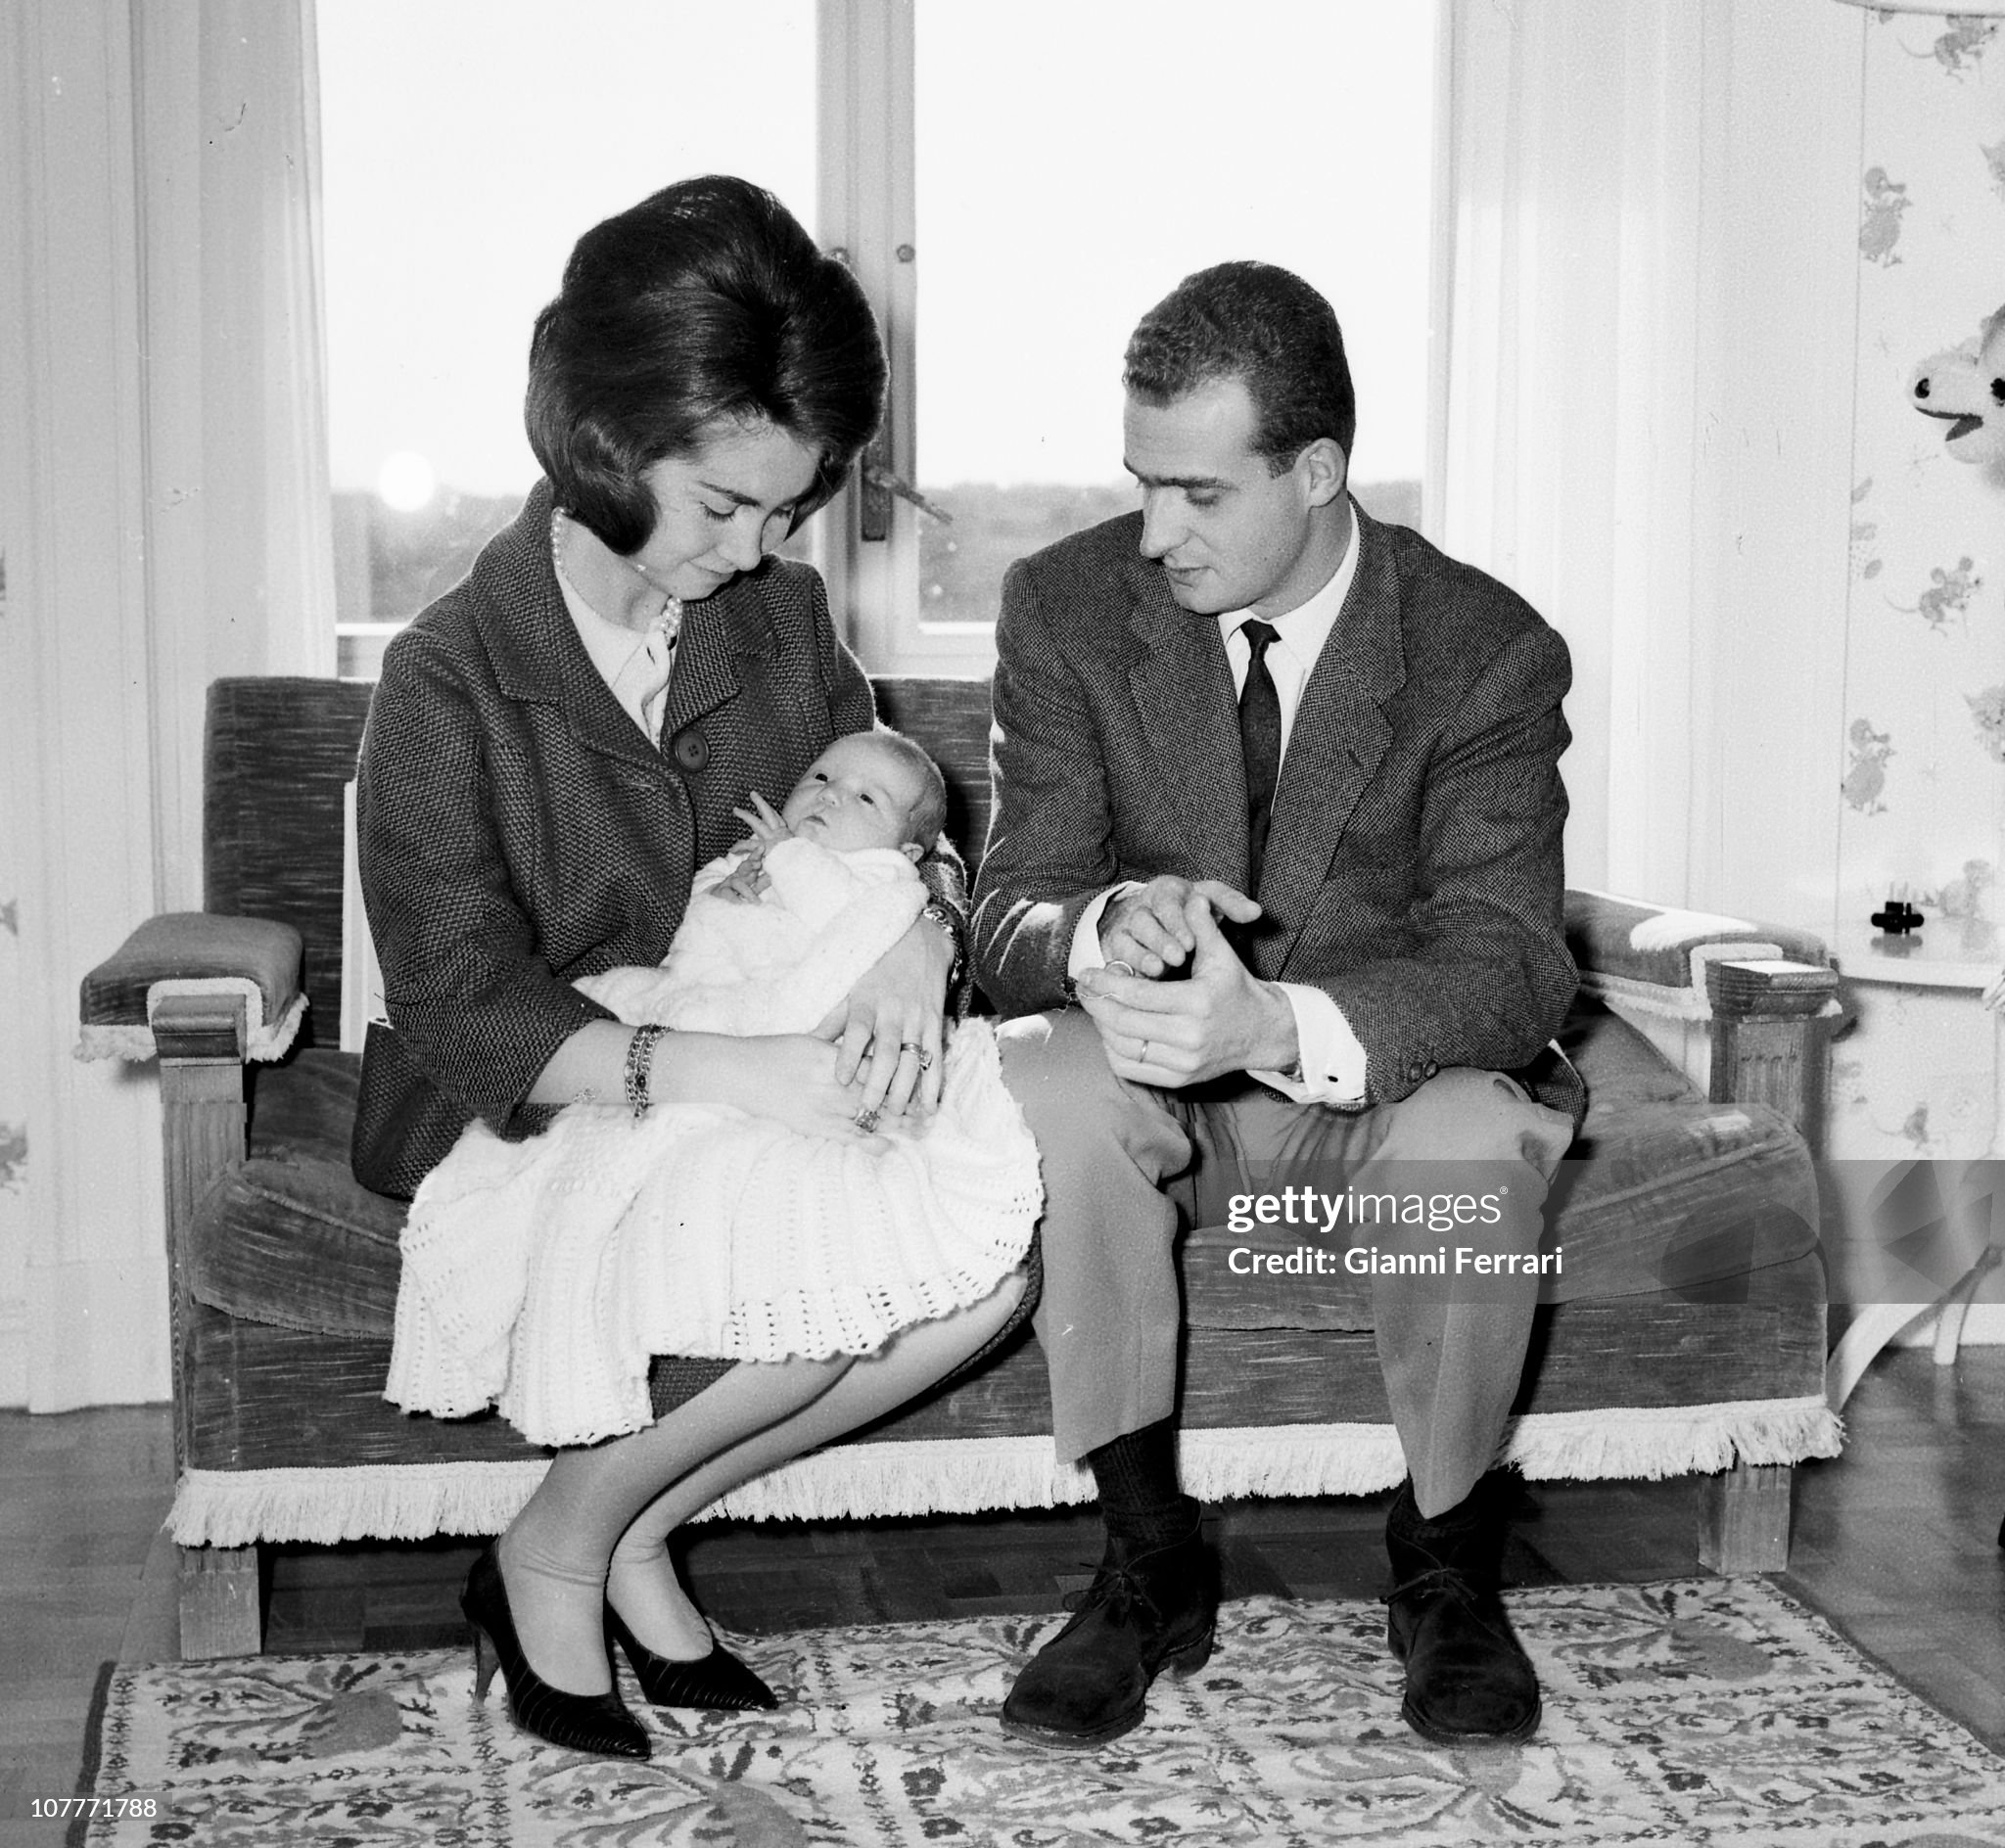 the-princes-juan-carlos-of-borbon-and-sofia-of-greece-along-with-his-daughter-elena-born.jpg